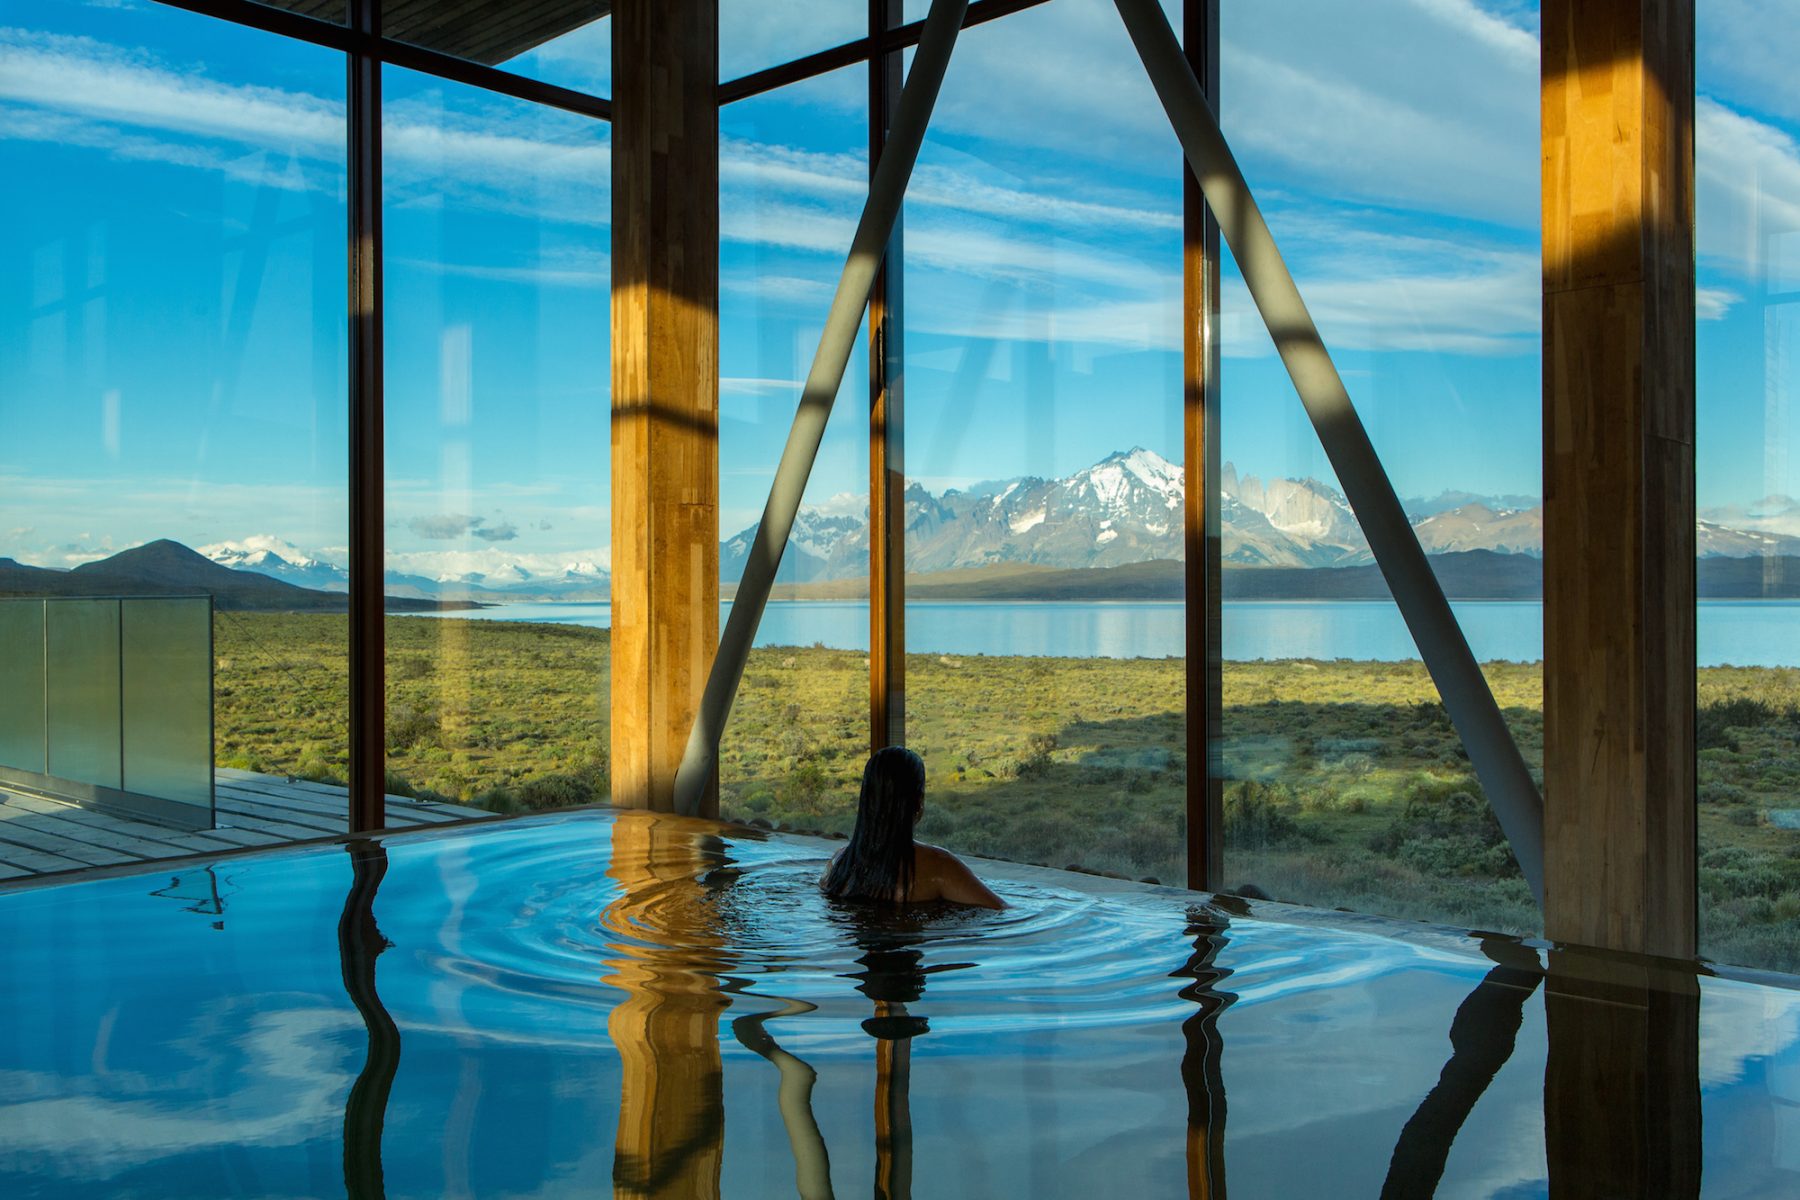 hotel-tierra-patagonia-spa-torres-del-paine-np-chile-patagonia